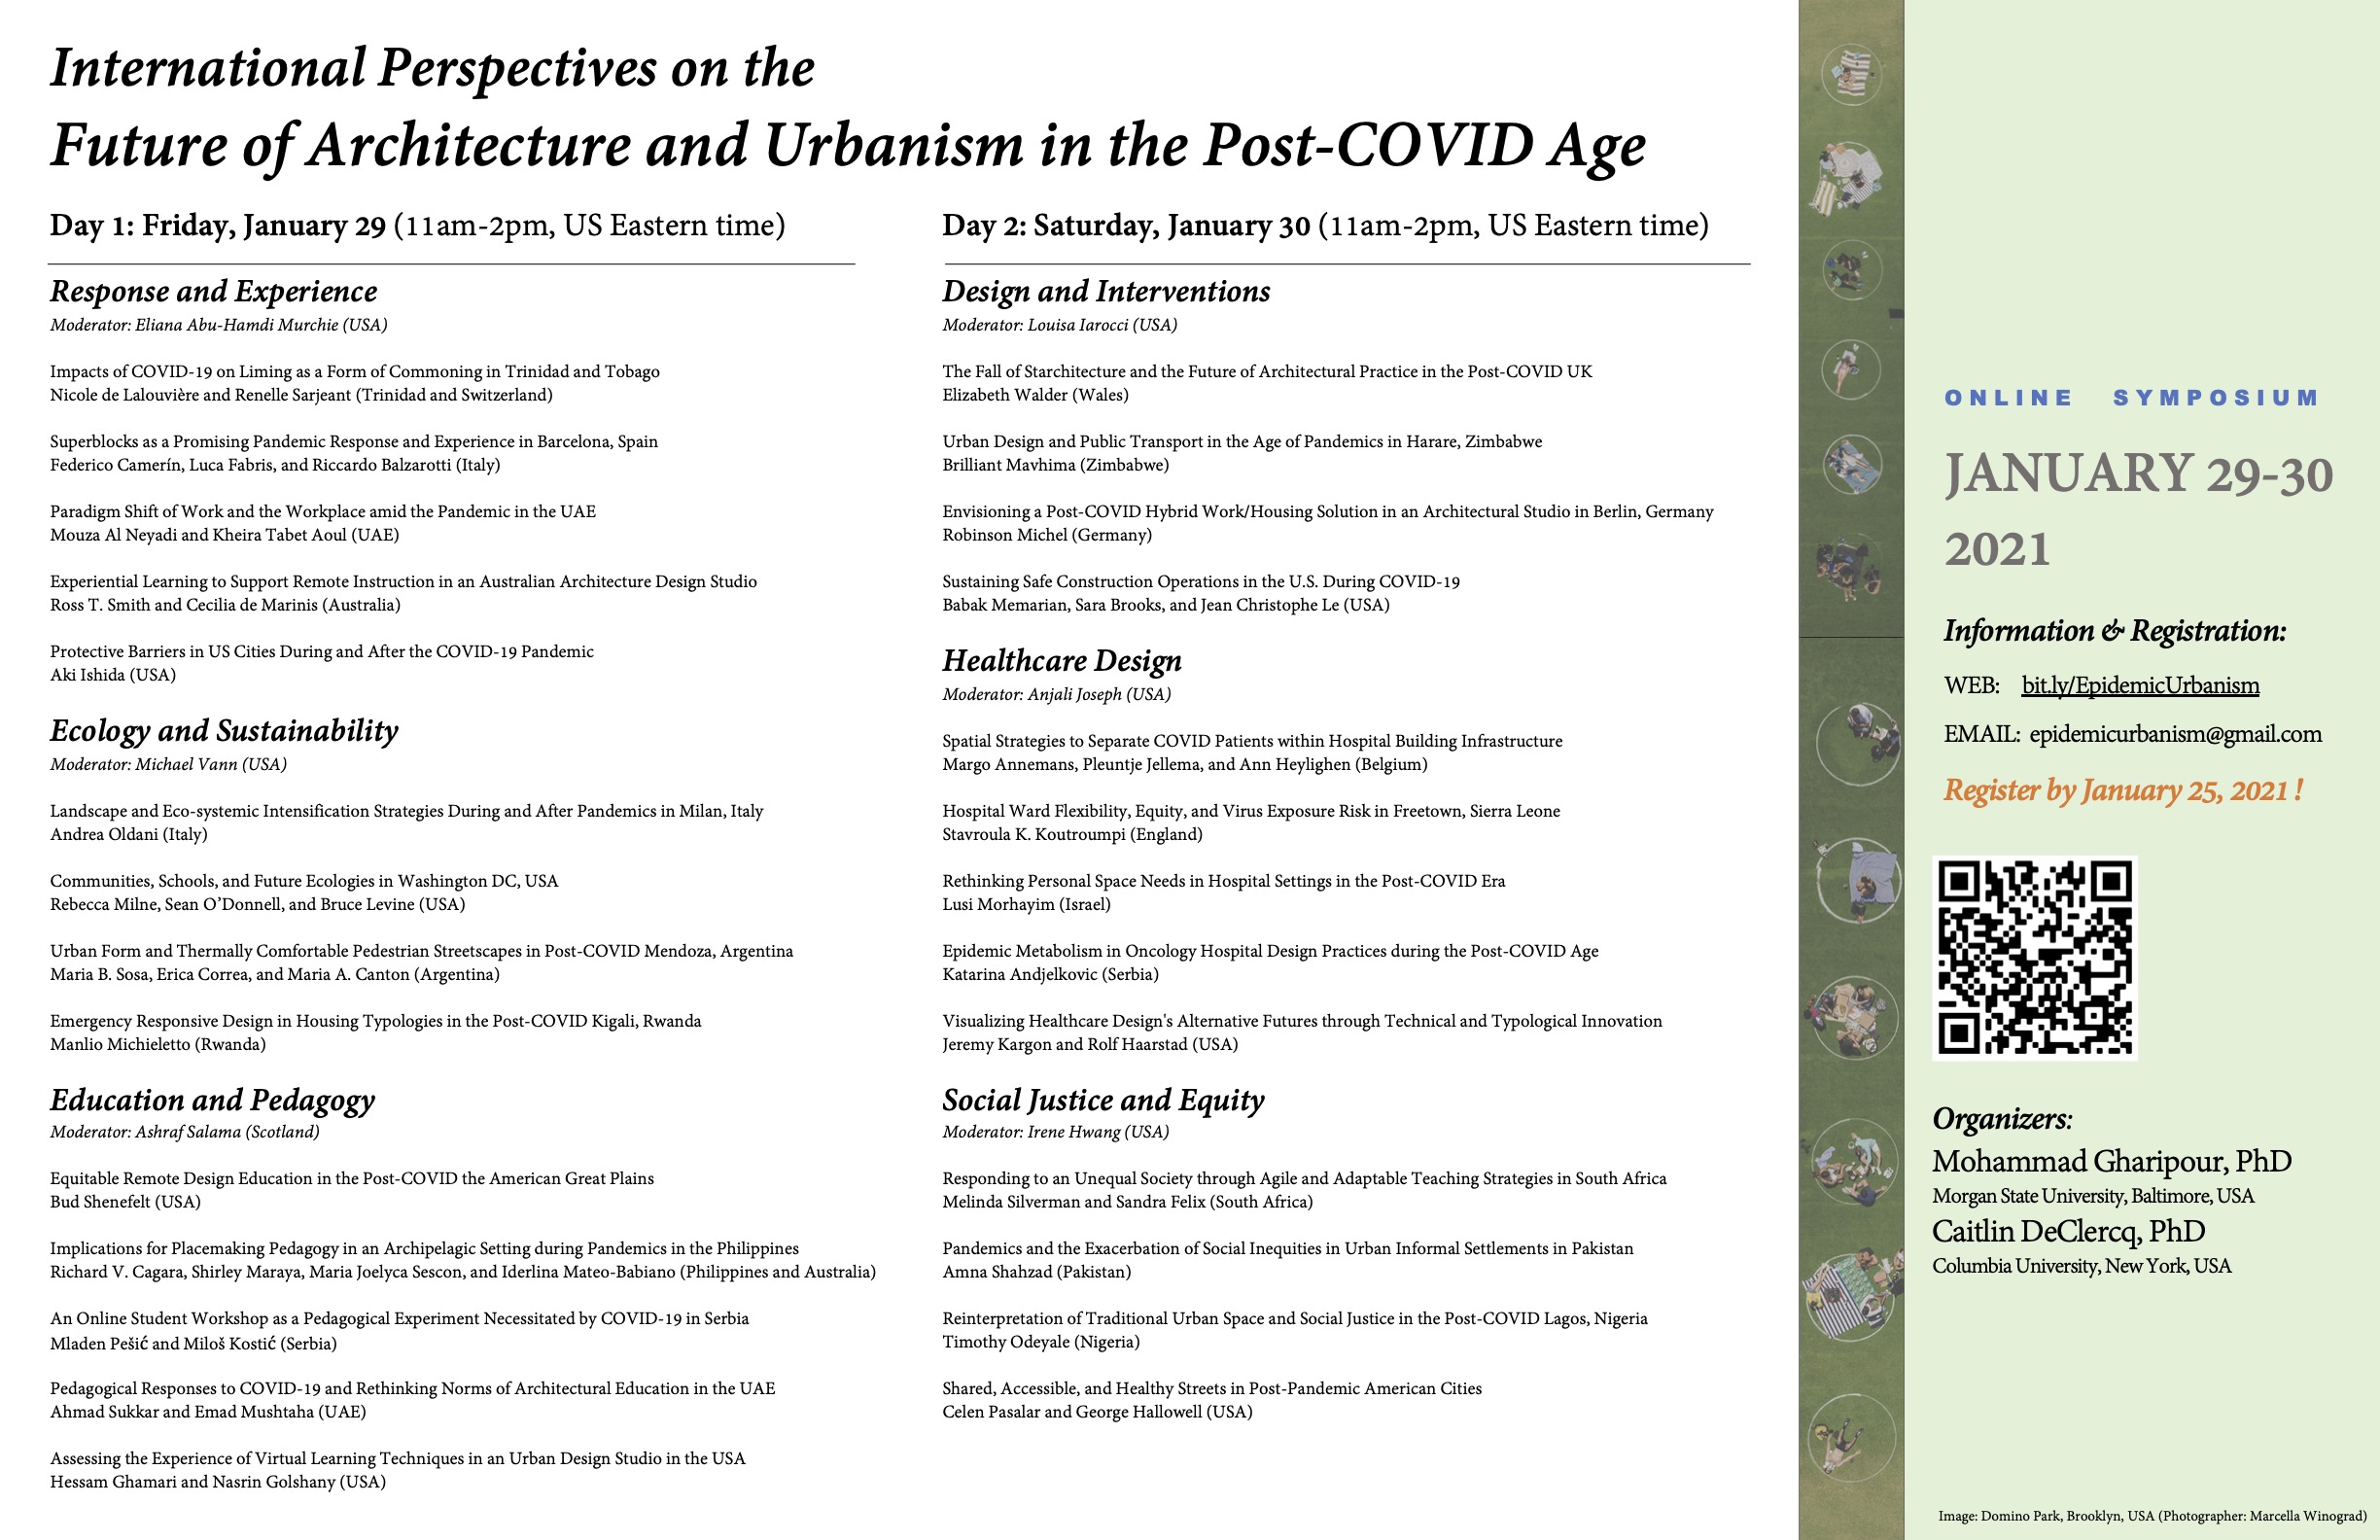 International Perspectives on the Future of Architecture and Urbanism in the Post-COVID Age